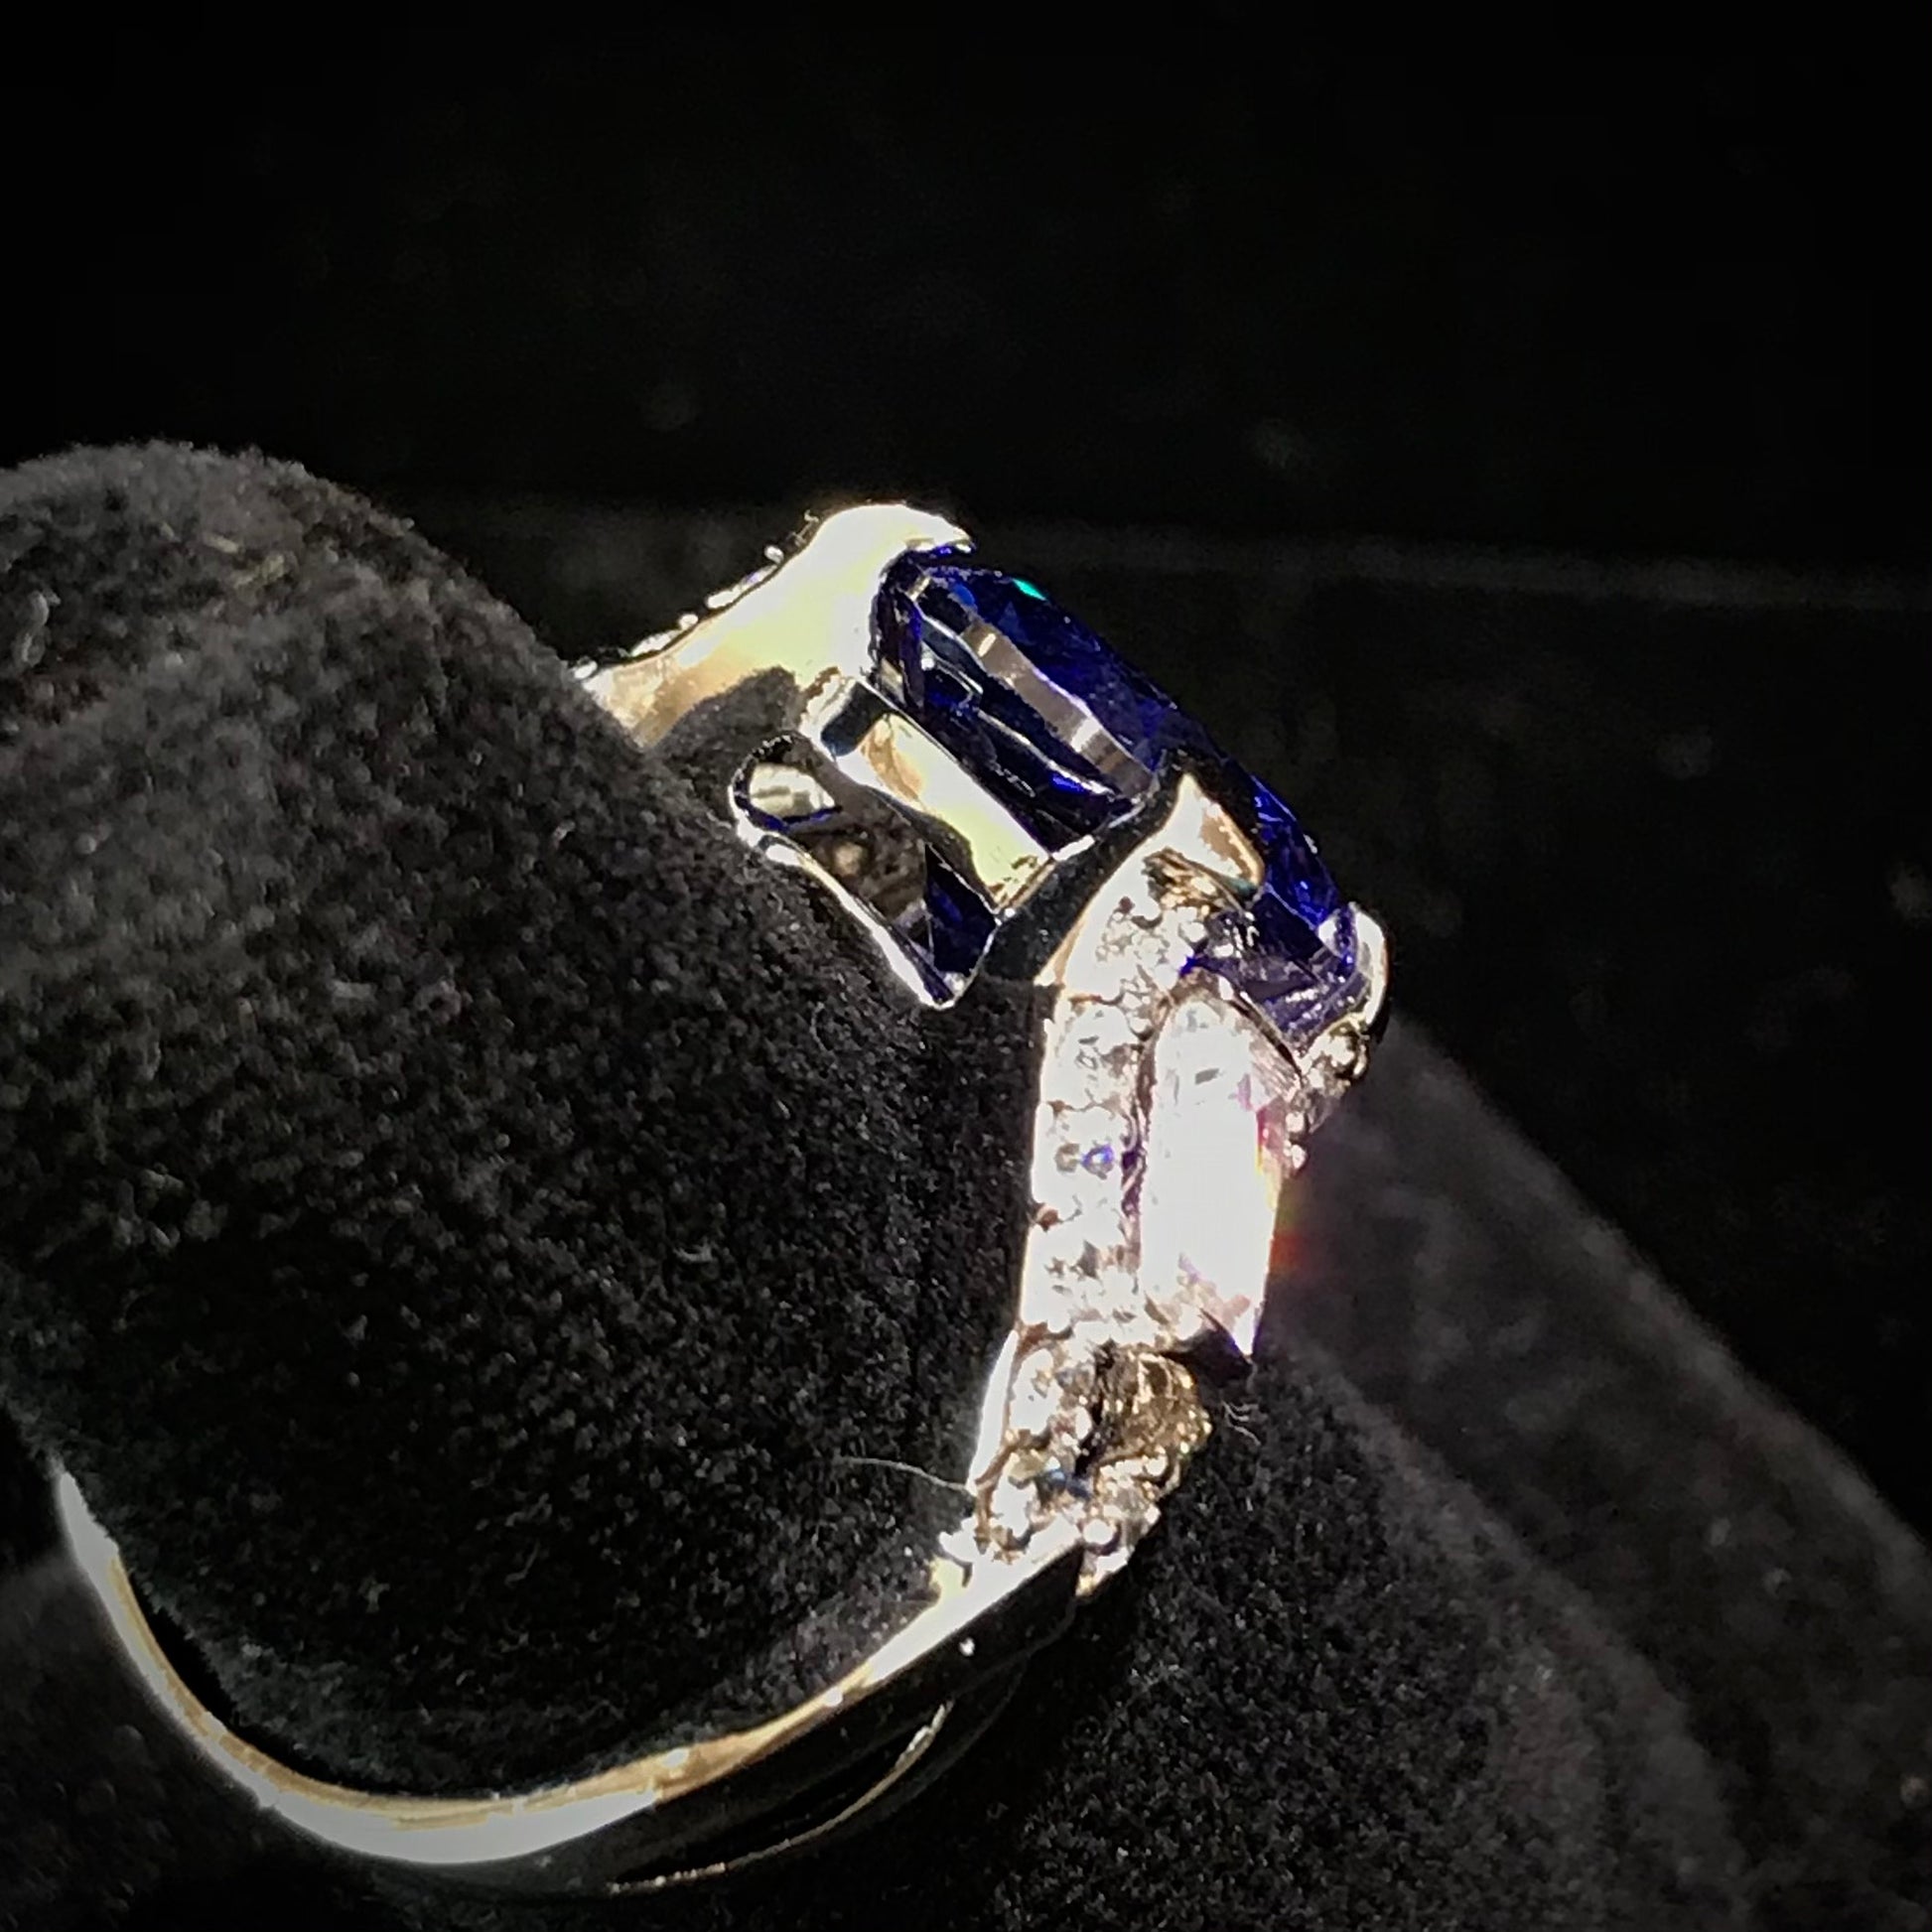 Dark blue synthetic gemstone and cubic zirconia set in sterling silver.